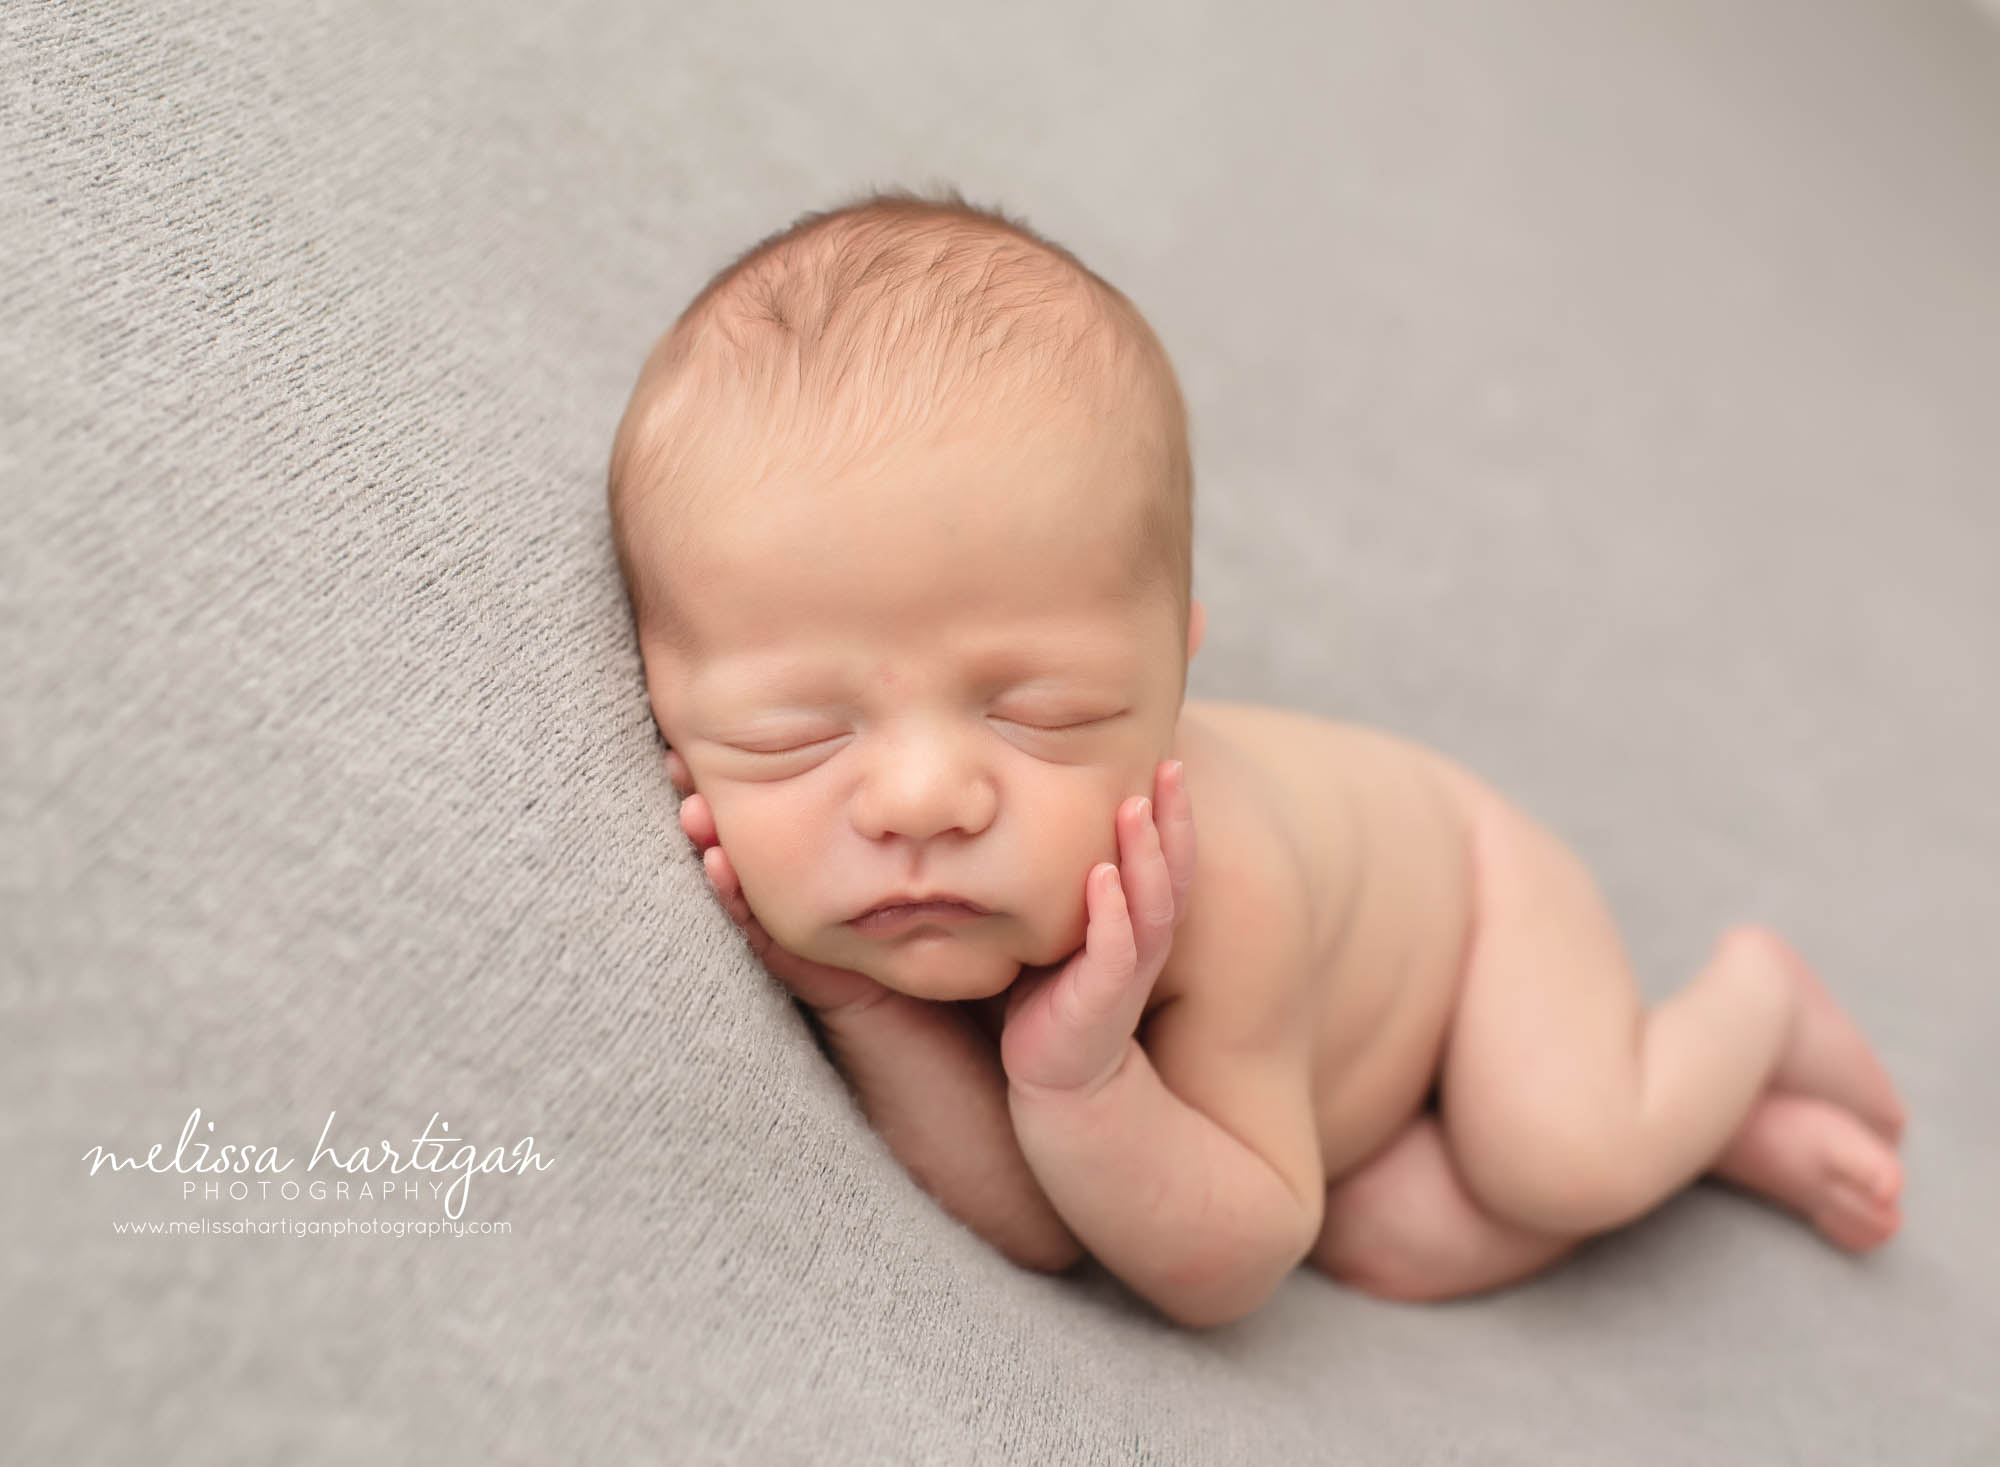 Baby boy laying on side in light grey blanket backdrop